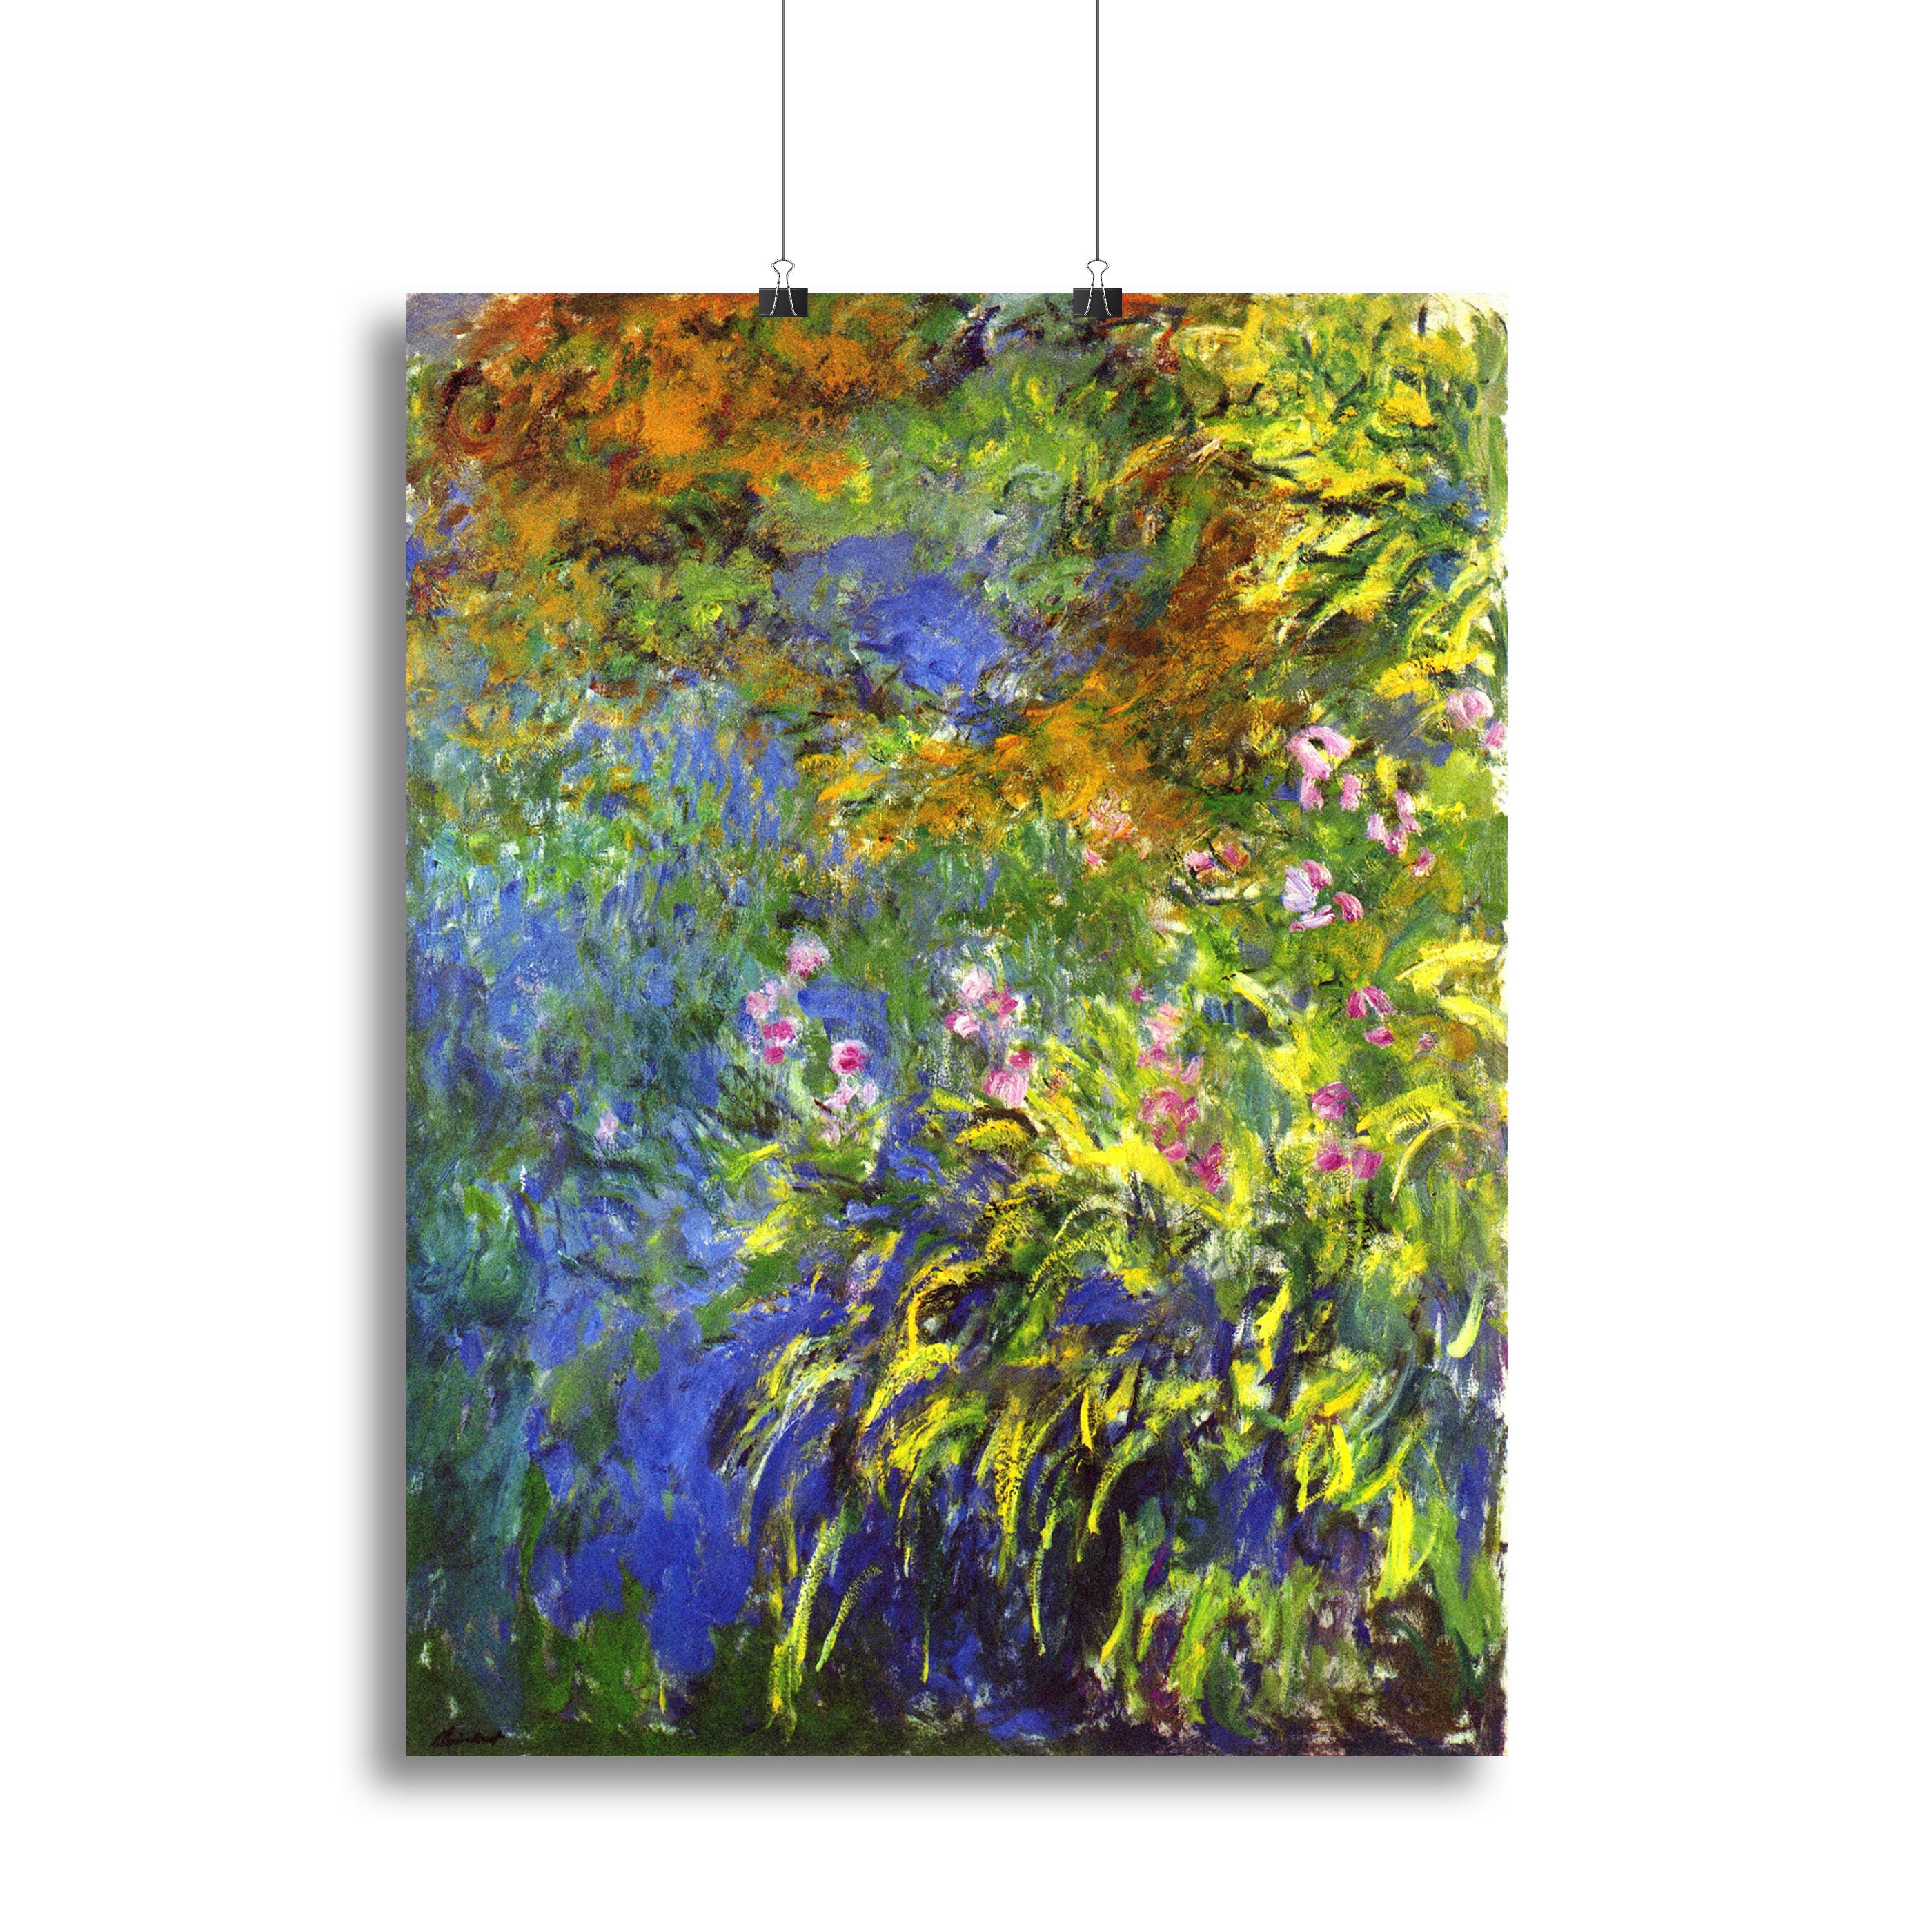 Iris at the sea rose pond 2 by Monet Canvas Print or Poster - Canvas Art Rocks - 2